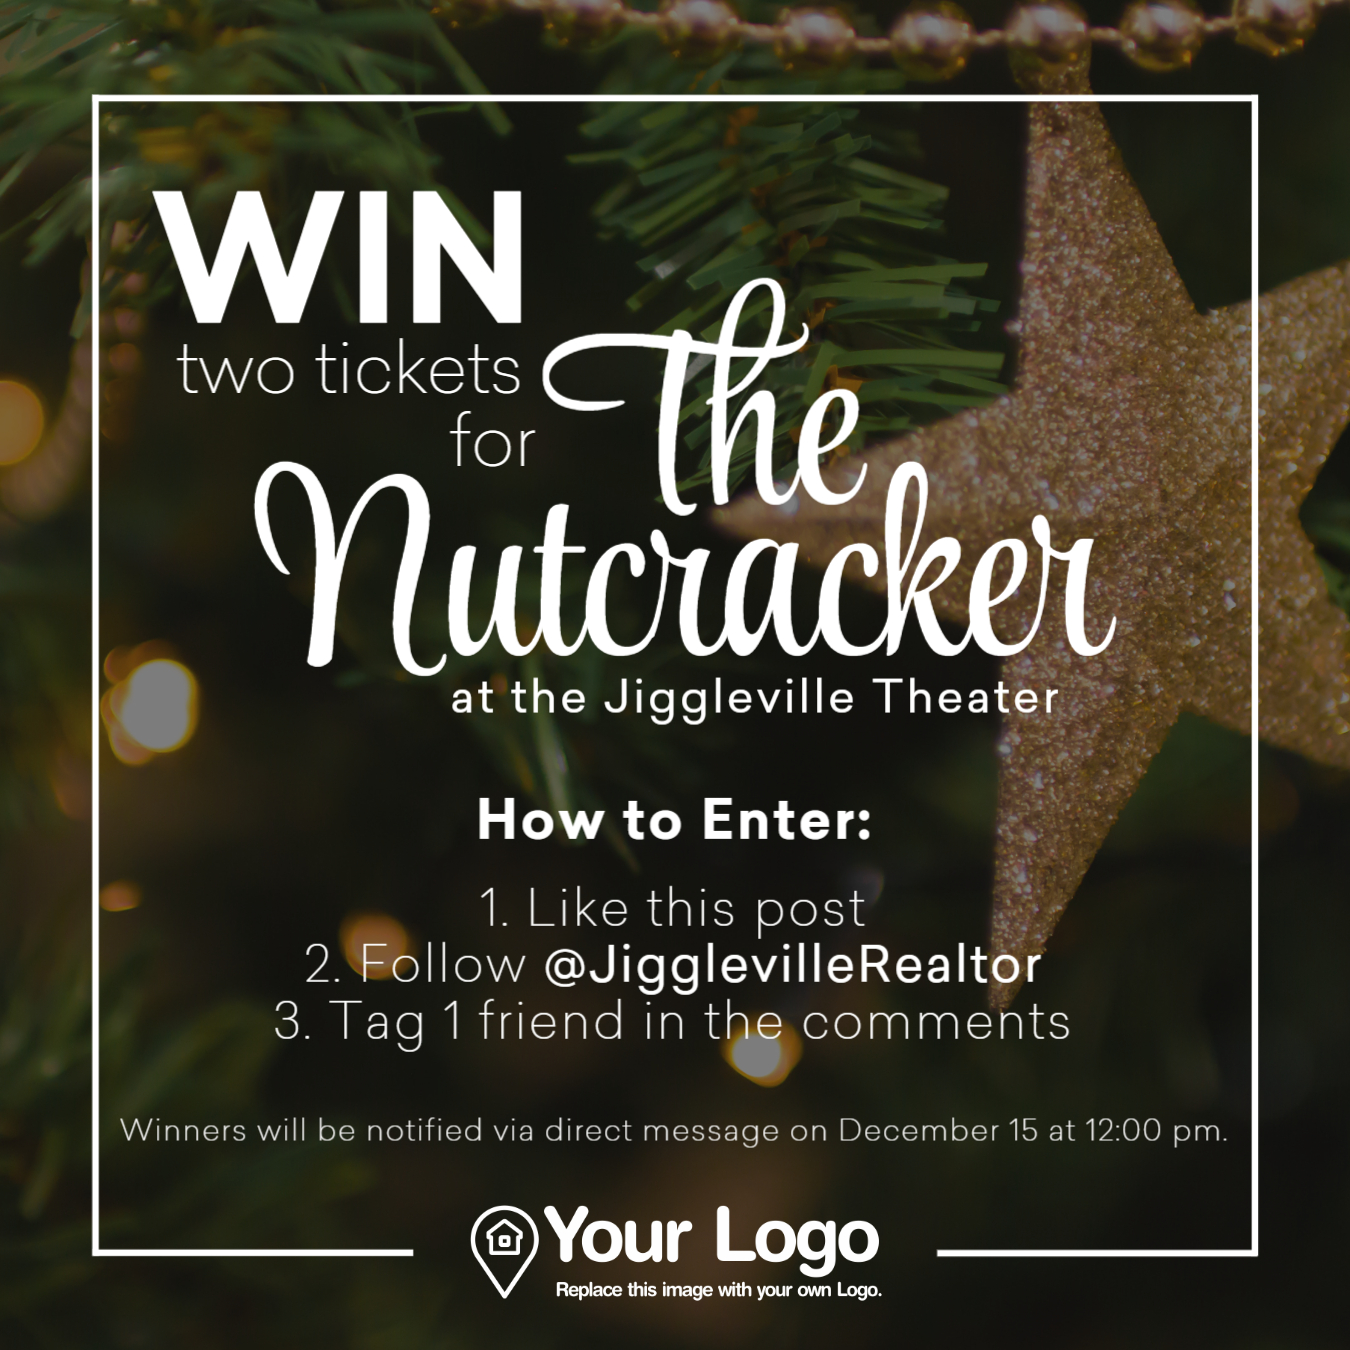 An Instagram giveaway is an excellent holiday real estate marketing strategy